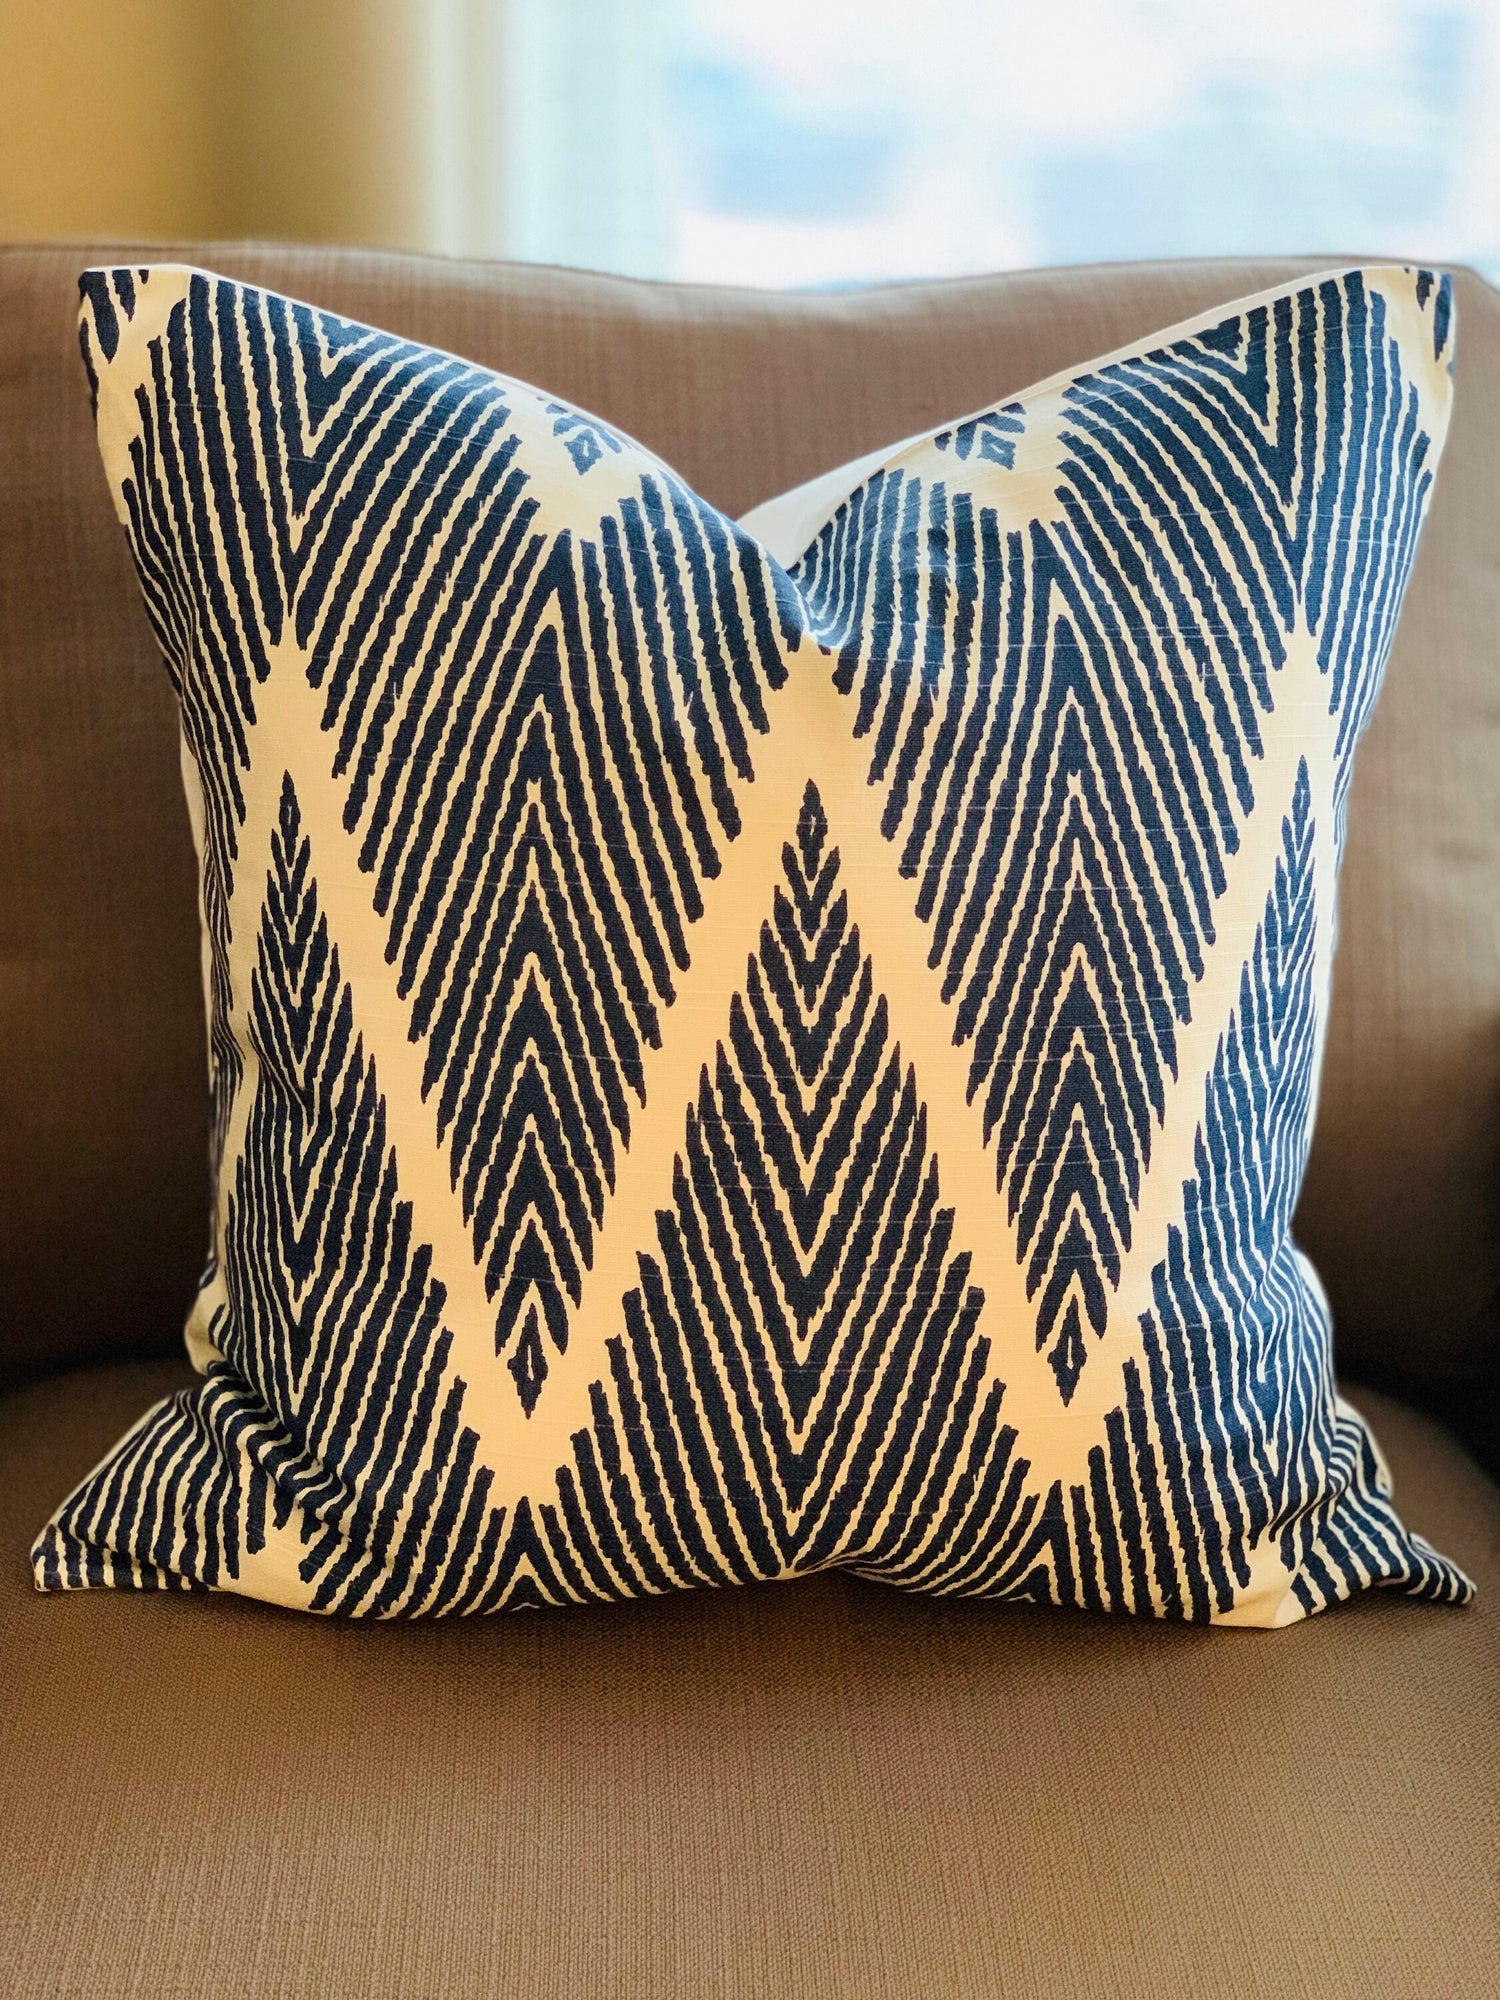 20" Decorative Pillow Cover in Vibrant Navy and Off White Ikat Chevron Print on Premium Lacefield Designs 100% Cotton Fabric, Custom Made